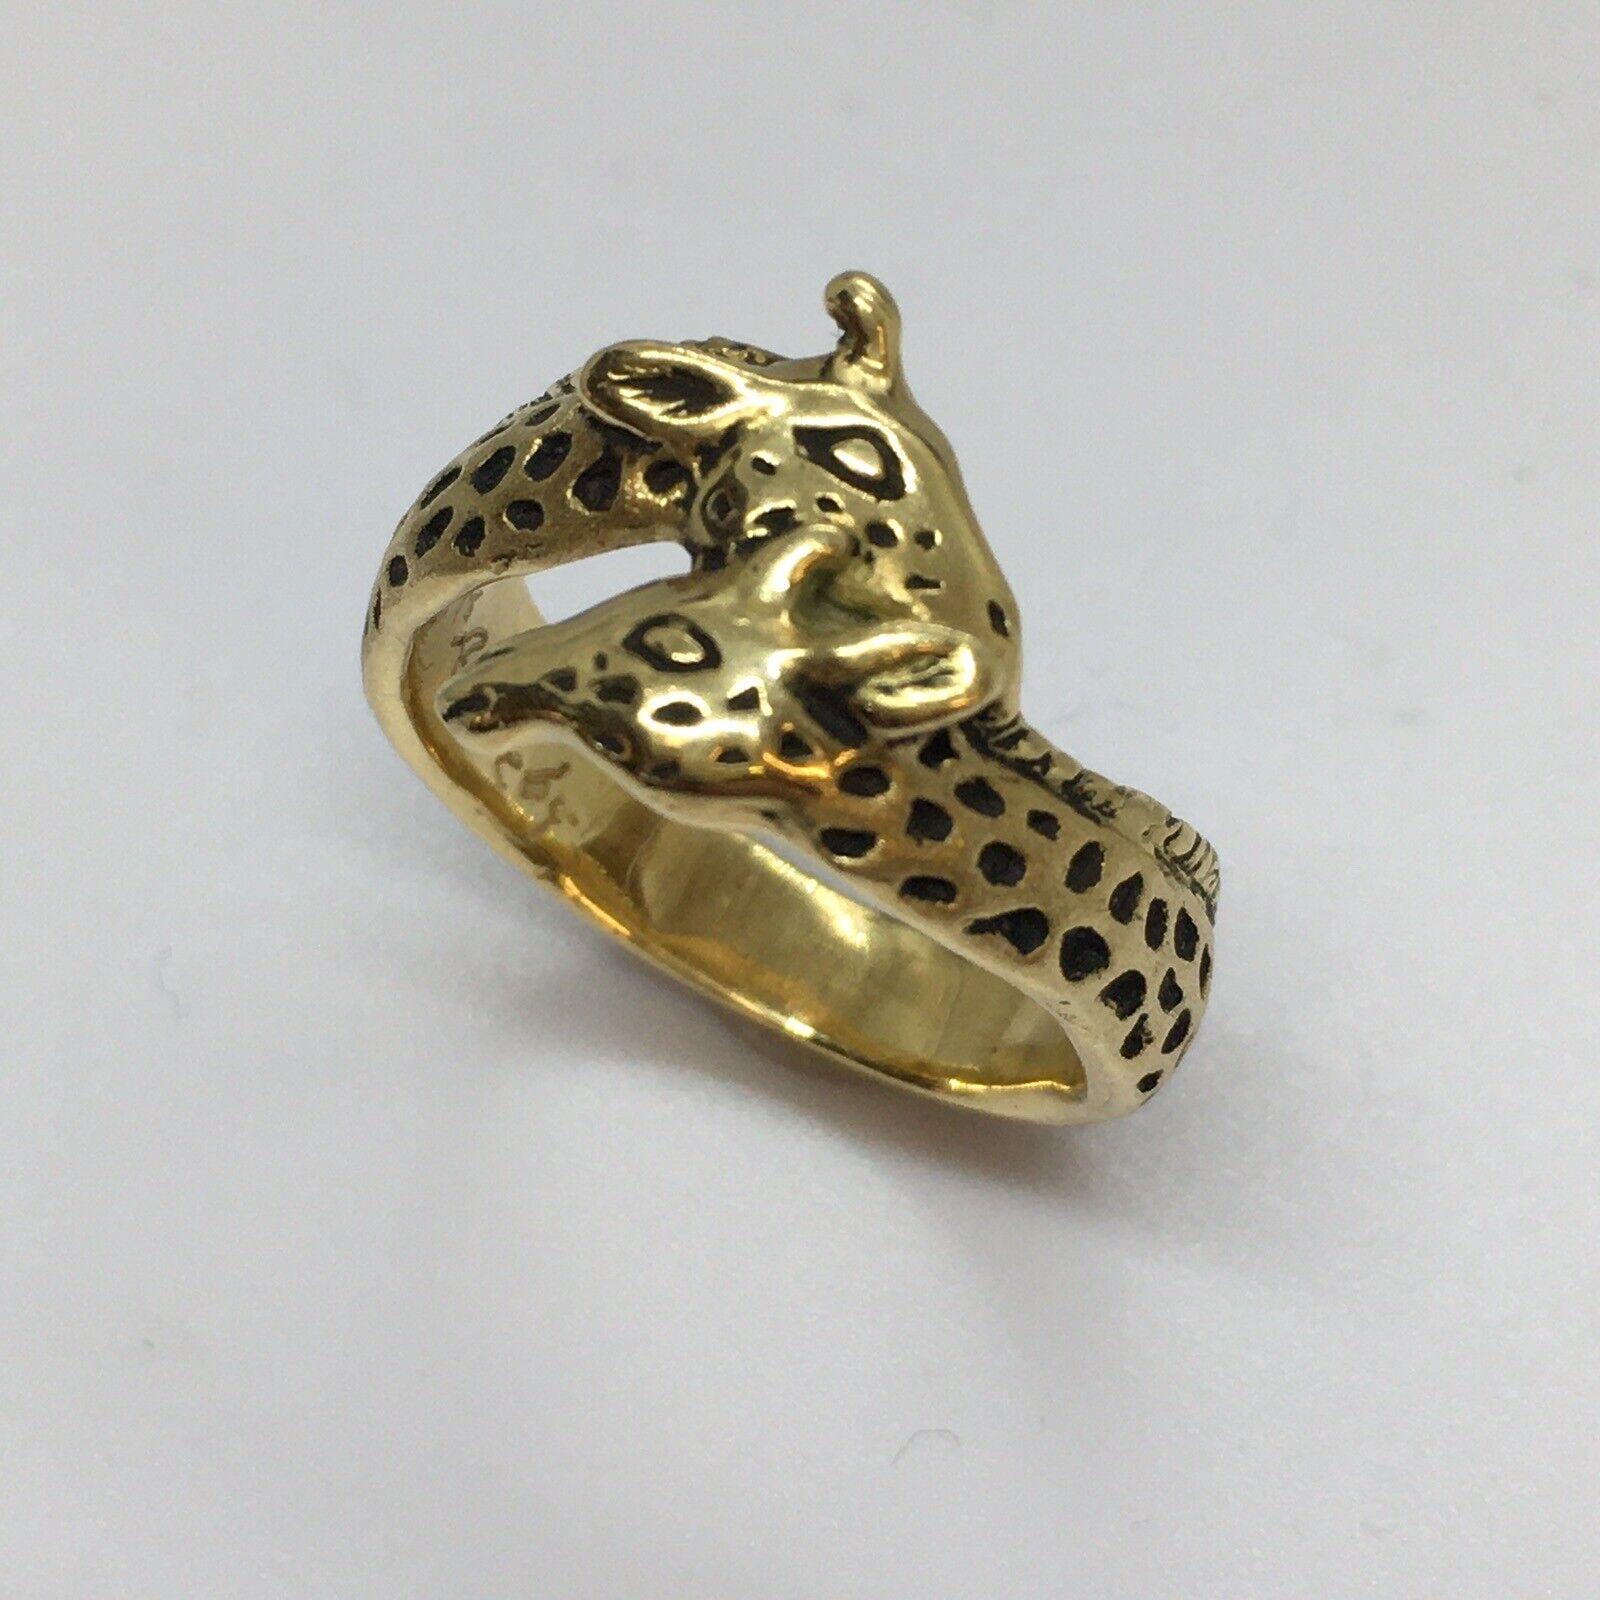 
G & G Appleby 18 Karat Yellow Gold  Enamel Double Giraffe Ring



Gregory A. Appleby born in Van Nuys, Ca. He partnered with Gayle Bright and began sculpting precious metal jewelry. Their work has been featured in many galleries.  Gayle and Gregory